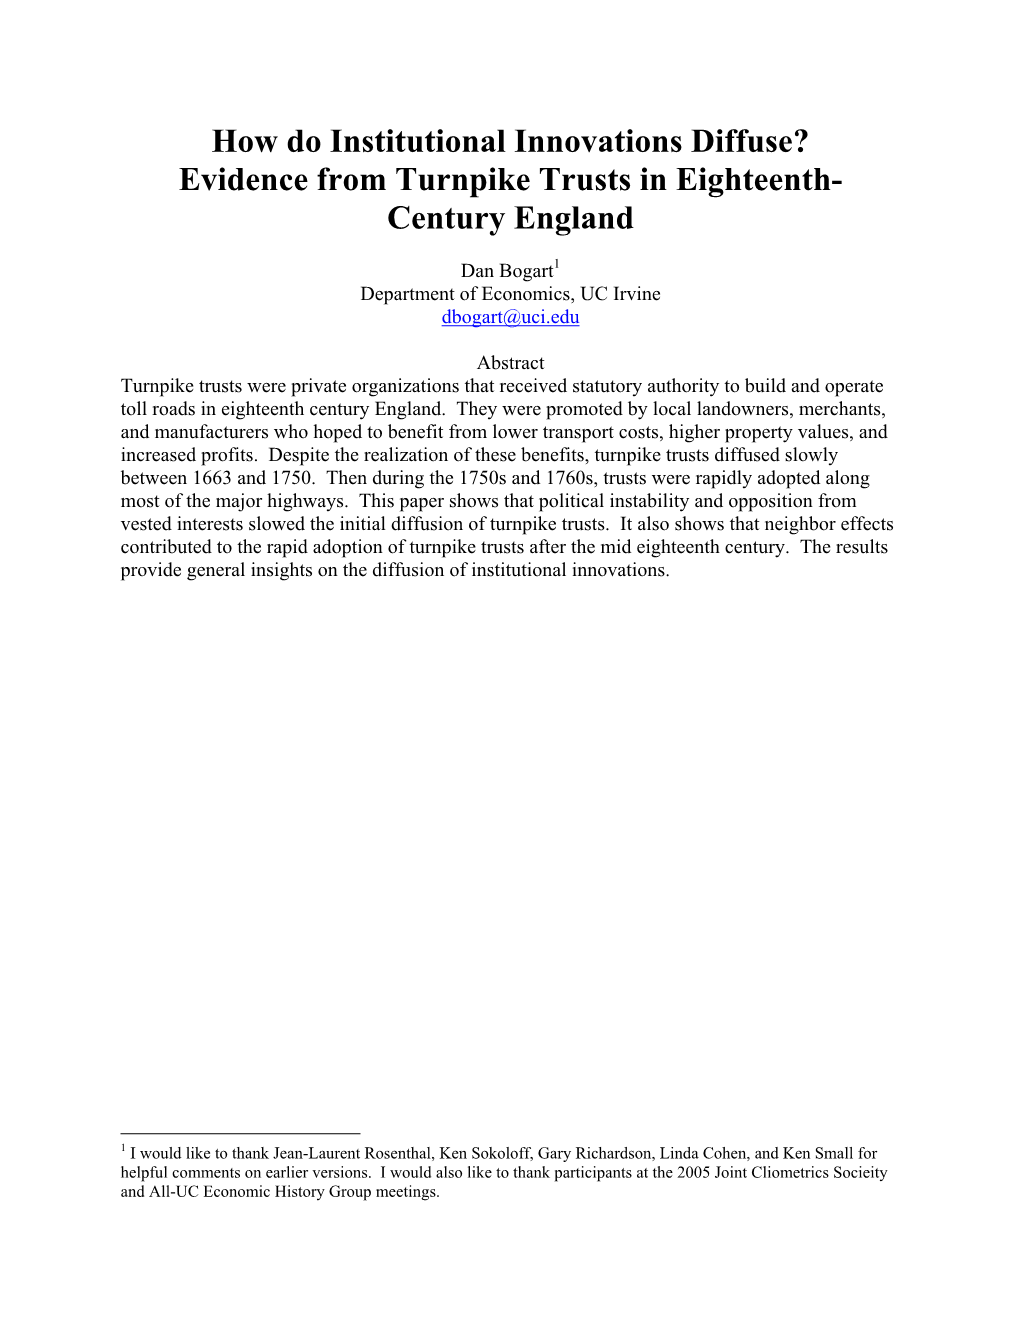 The Diffusion of Turnpike Trusts in Eighteenth Century Britain